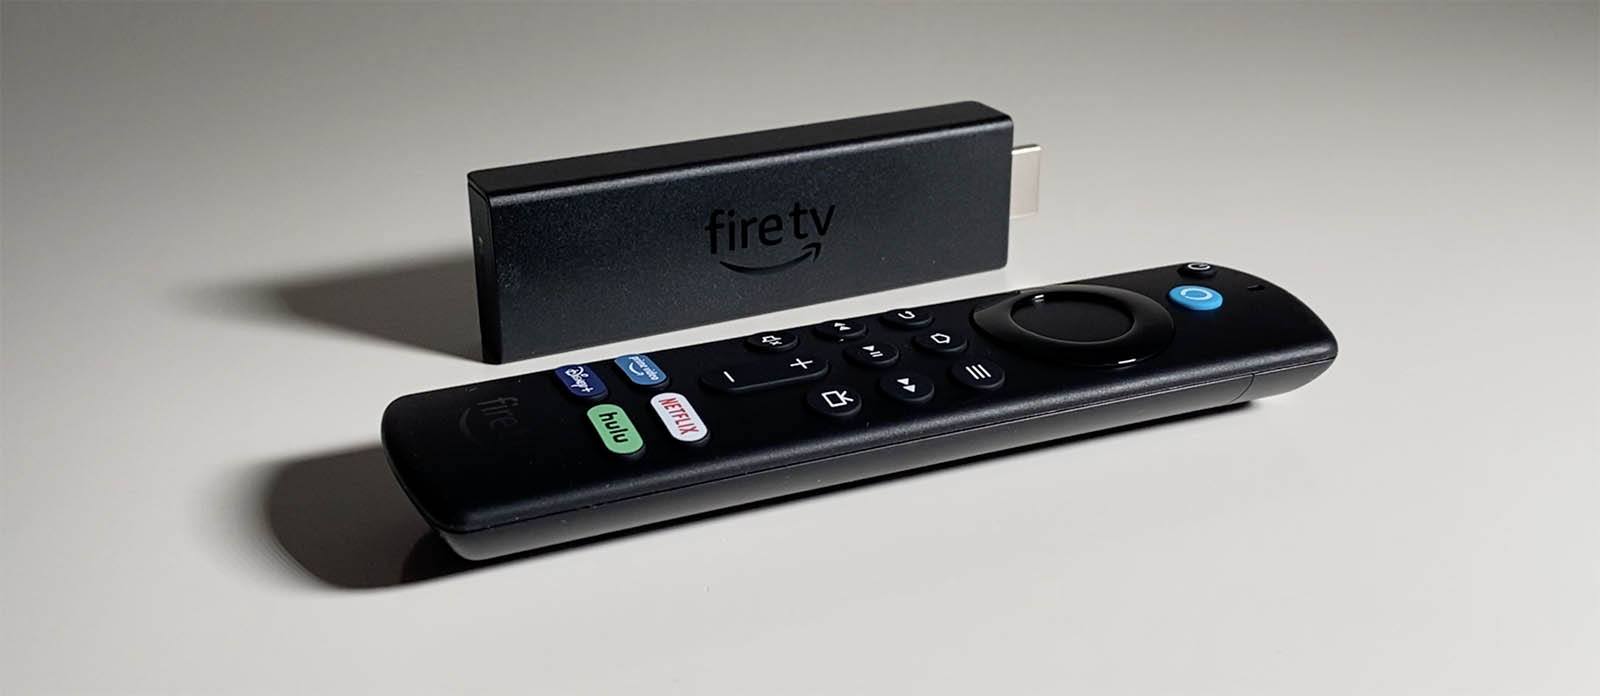 Video: The Fire TV Stick 4K Max is a Worthy Update with Forward-Looking WiFi